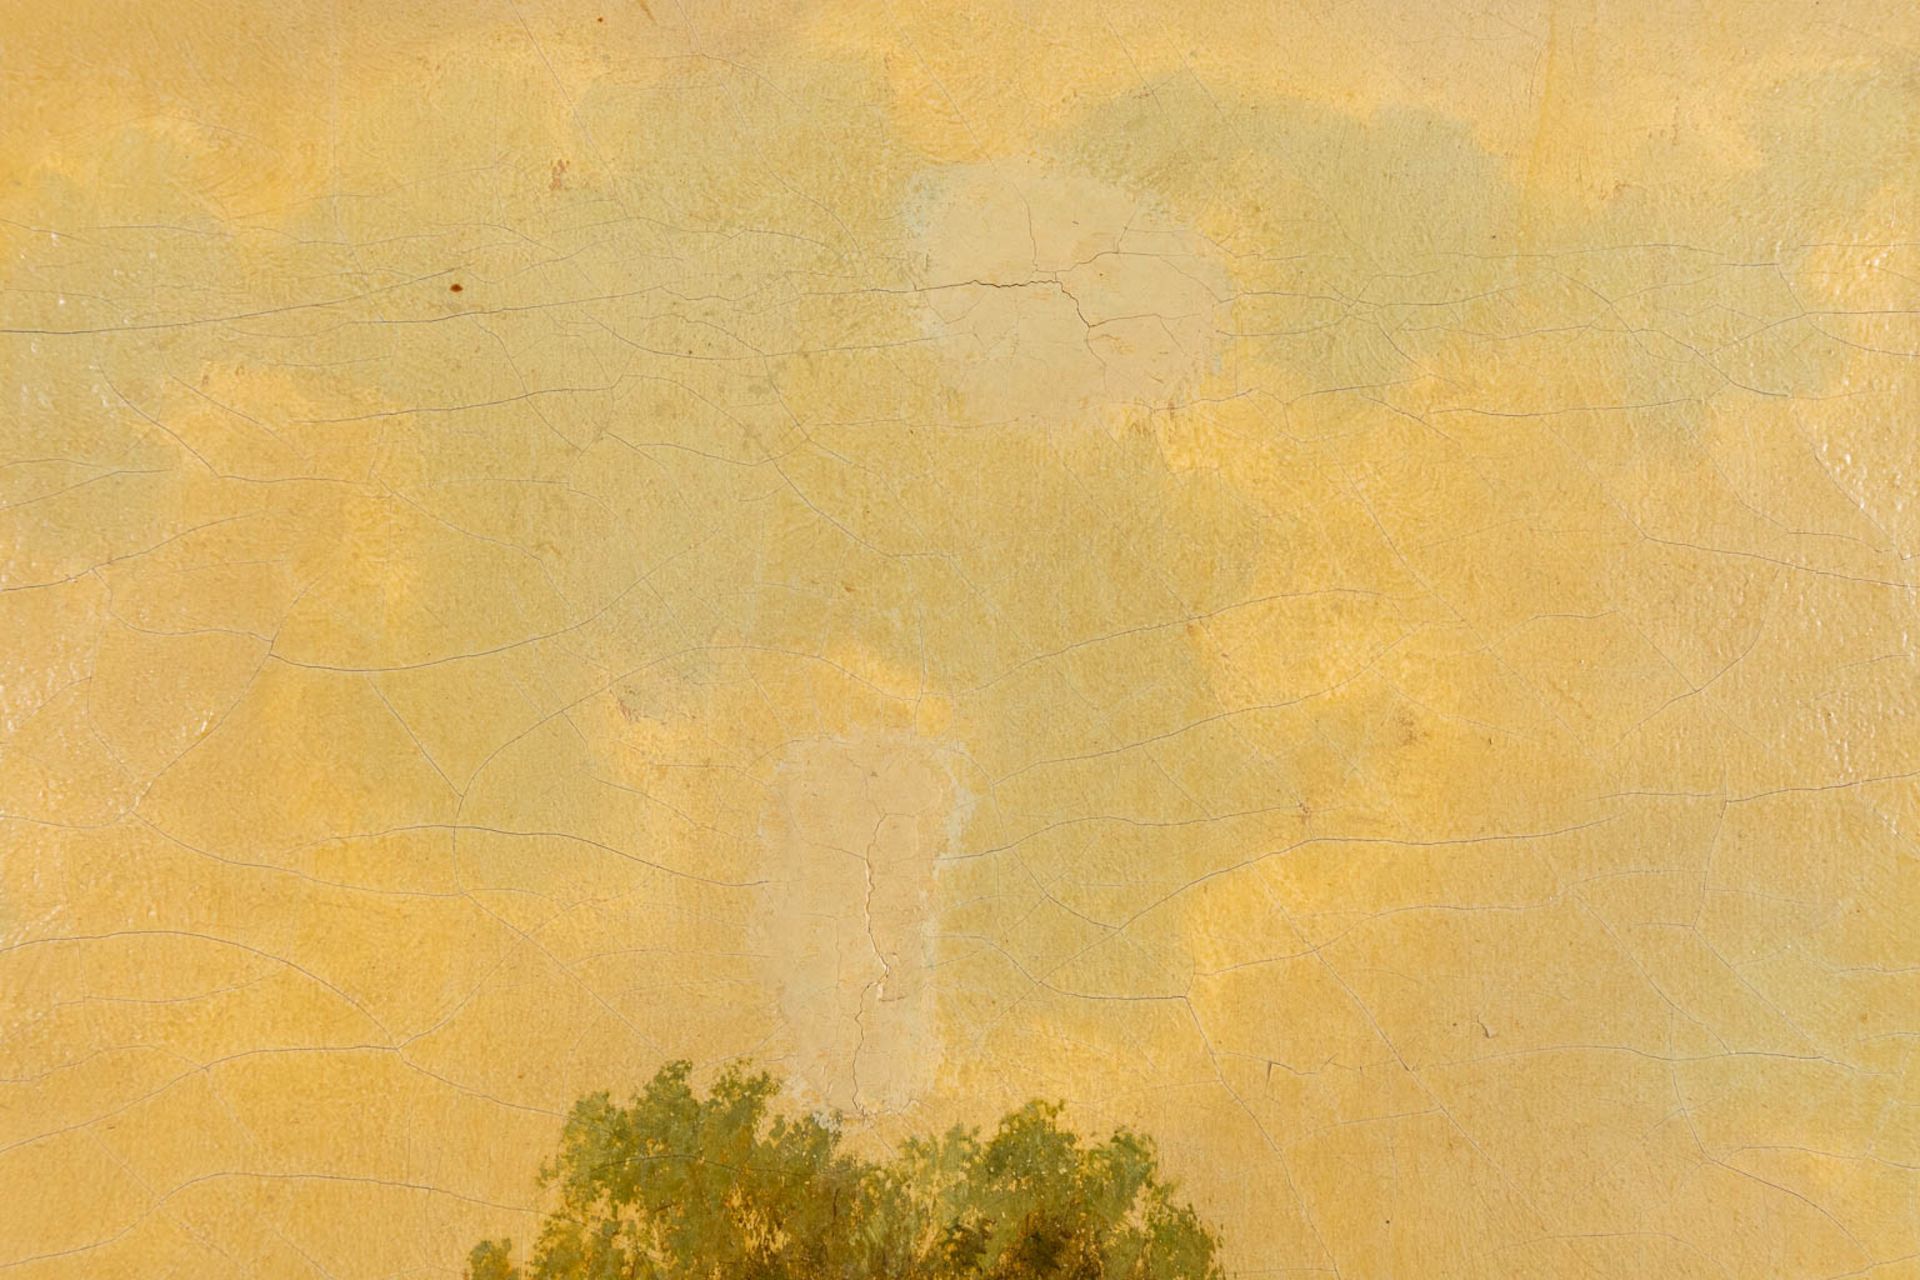 A dune view with trees, oil on canvas. Signed. 19th century. (W: 75 x H: 56 cm) - Image 8 of 9